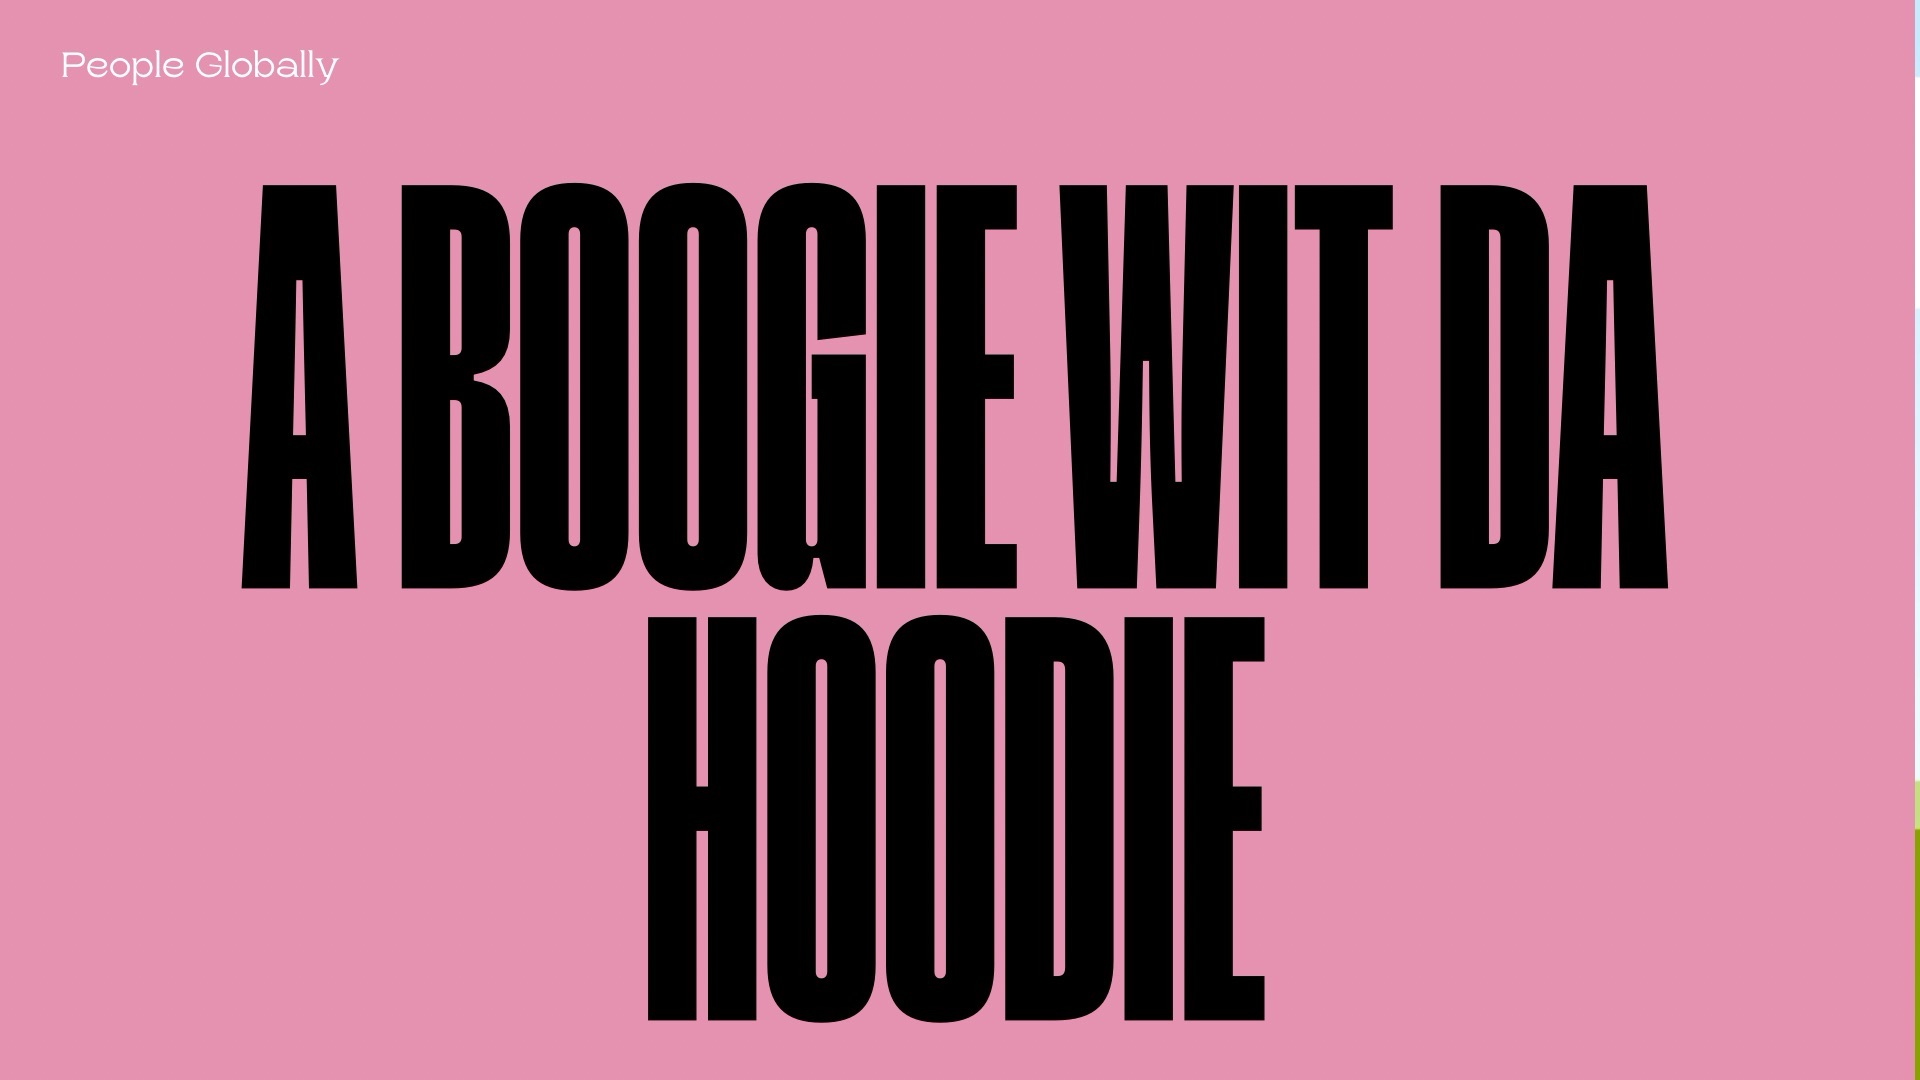 What is A Boogie Wit da Hoodie total number of monthly listeners on Spotify.